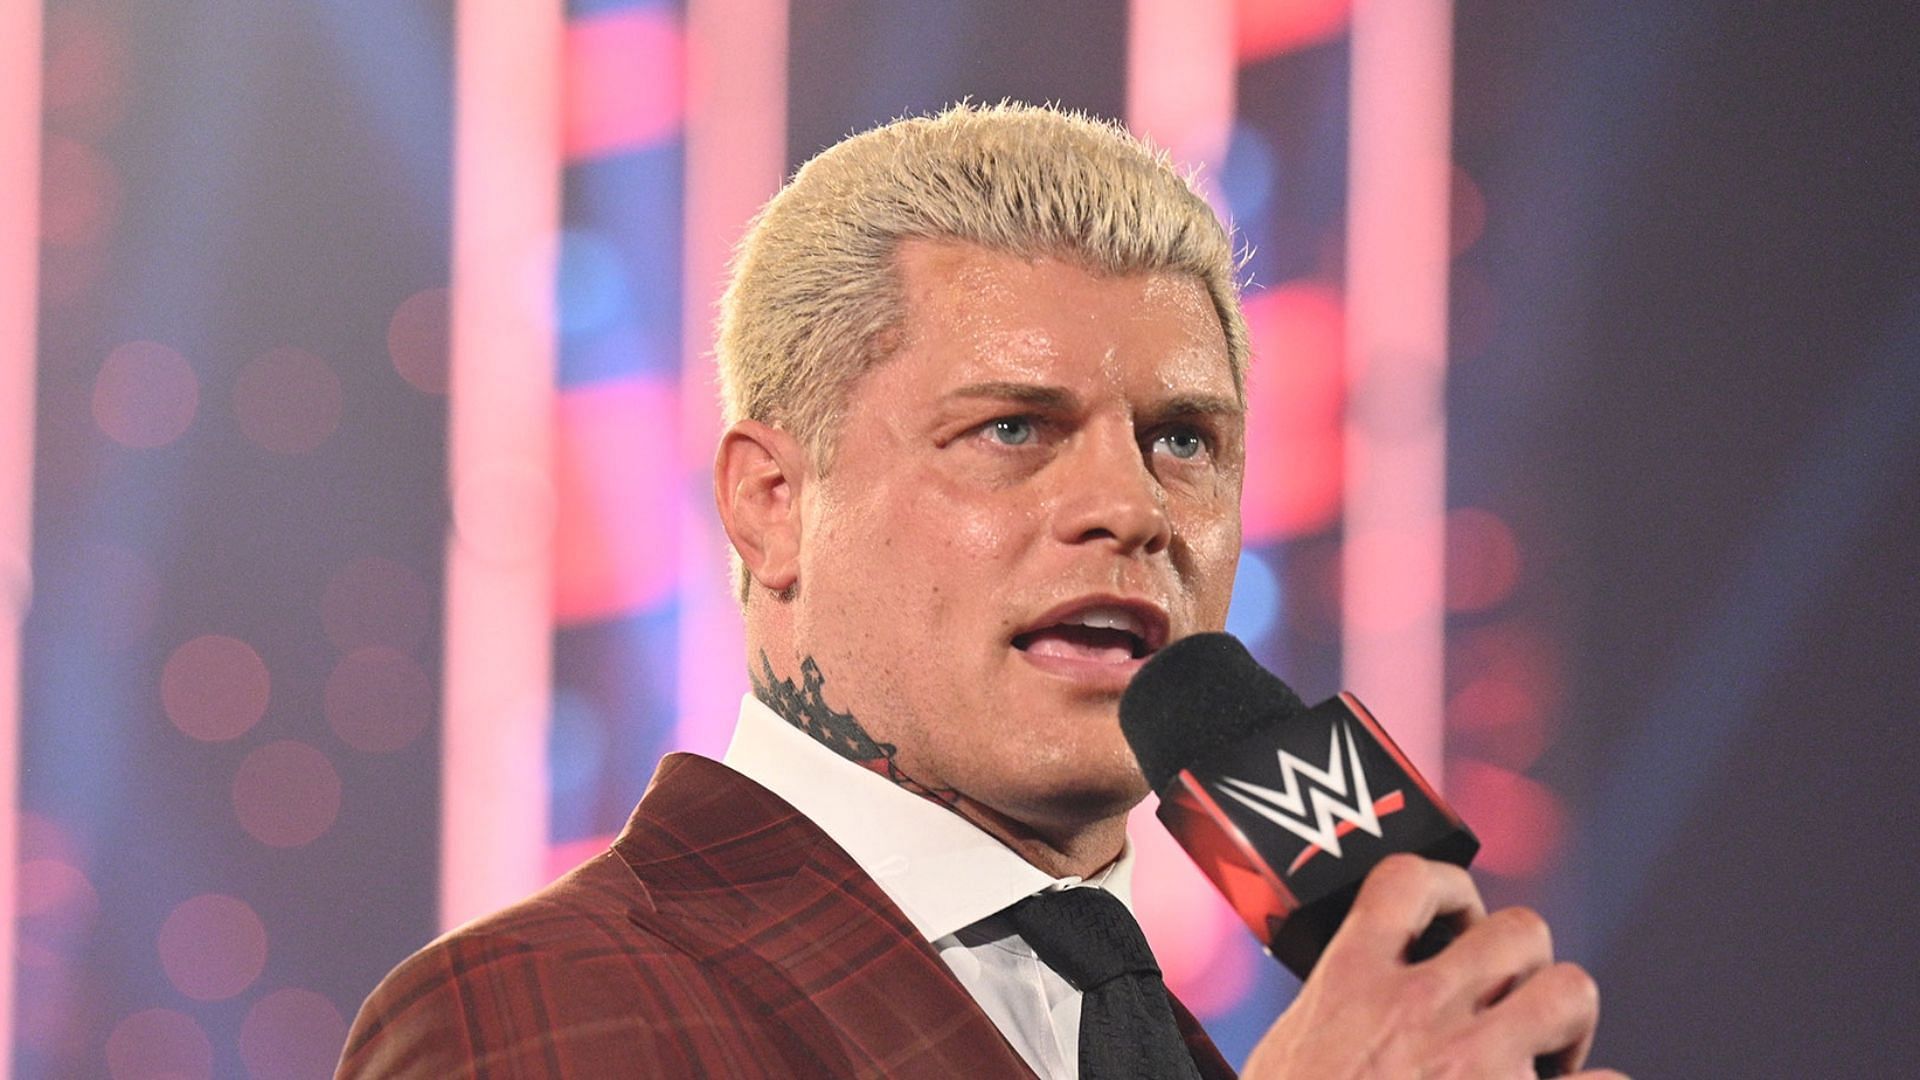 Cody Rhodes is set to face Brock Lesnar at SummerSlam.